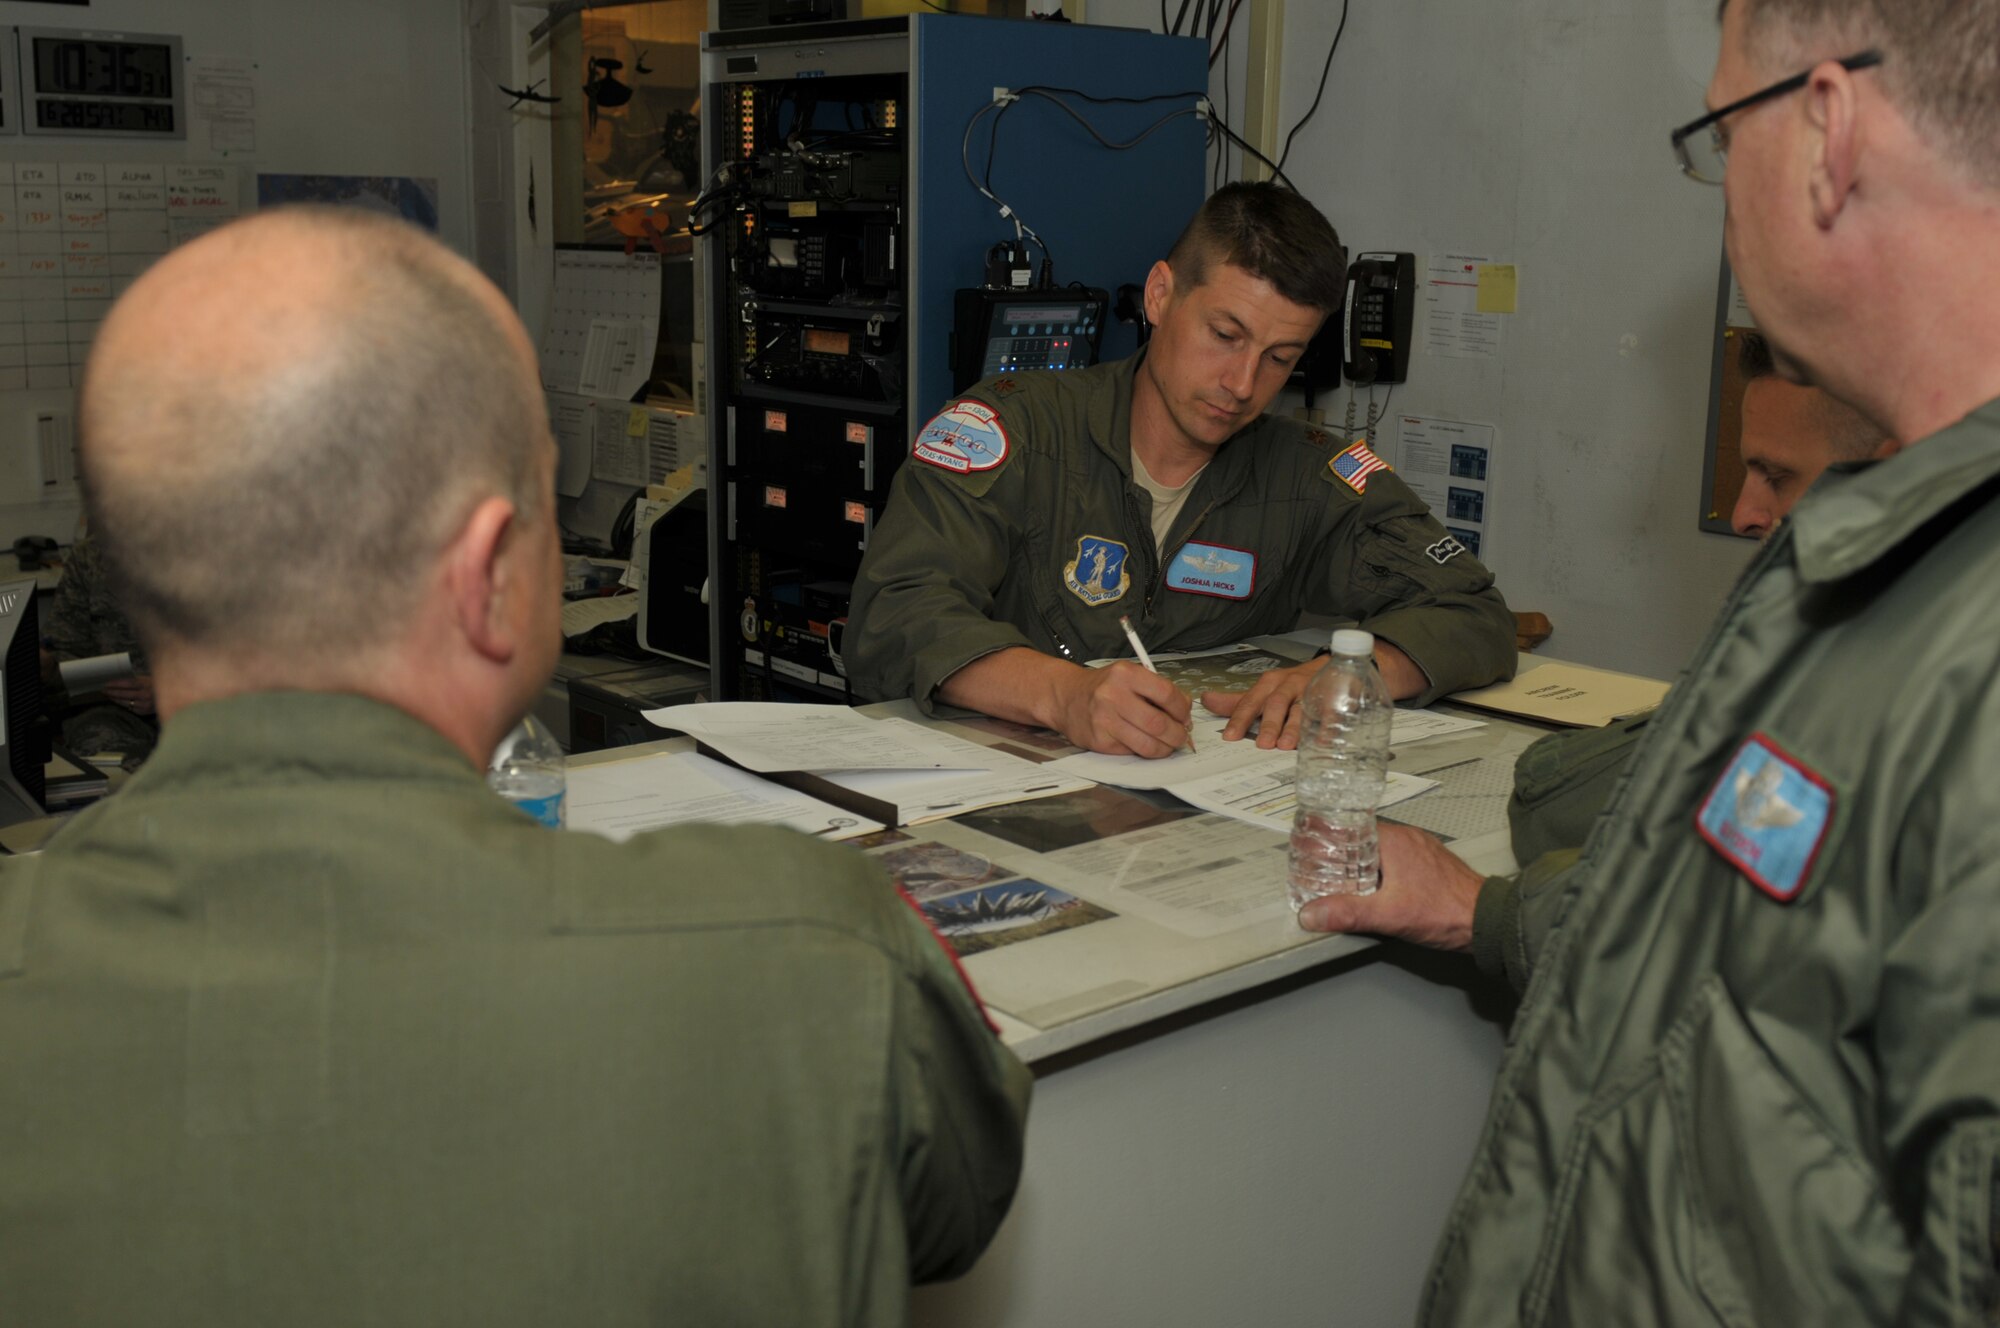 Maj. Joshua Hicks, deployed commander for the most recent Greenland rotation, goes over flight planning with aircrew members at Kangerlussuaq, Greenland on June 28, 2014. Two LC-130s and 70 Airmen from the Wing recently completed the fourth rotation of the 2014 Greenland season. The unit flies supply and refueling missions to various camps in support of the National Science Foundation and also trains for the Operation Deep Freeze mission in Antarctica. (U.S. Air National Guard photo by Master Sgt. William Gizara)